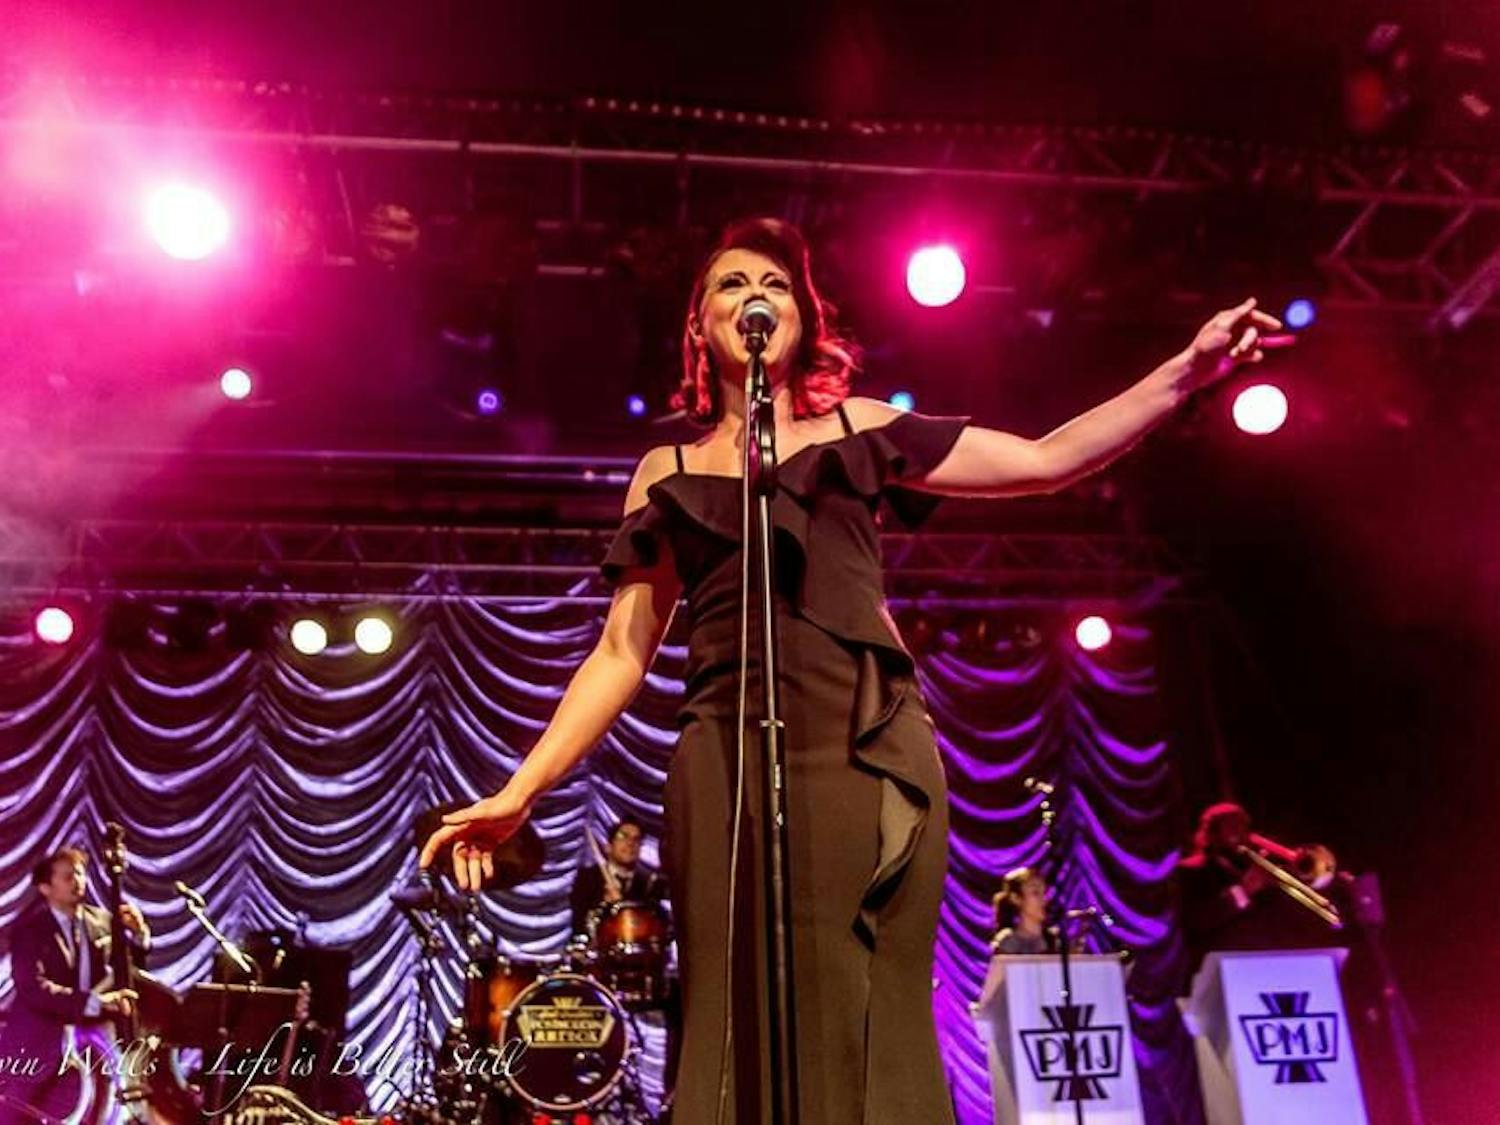 Postmodern Jukebox charm the crowd with their intelligent and jazzy versions of today's&nbsp;biggest hits.